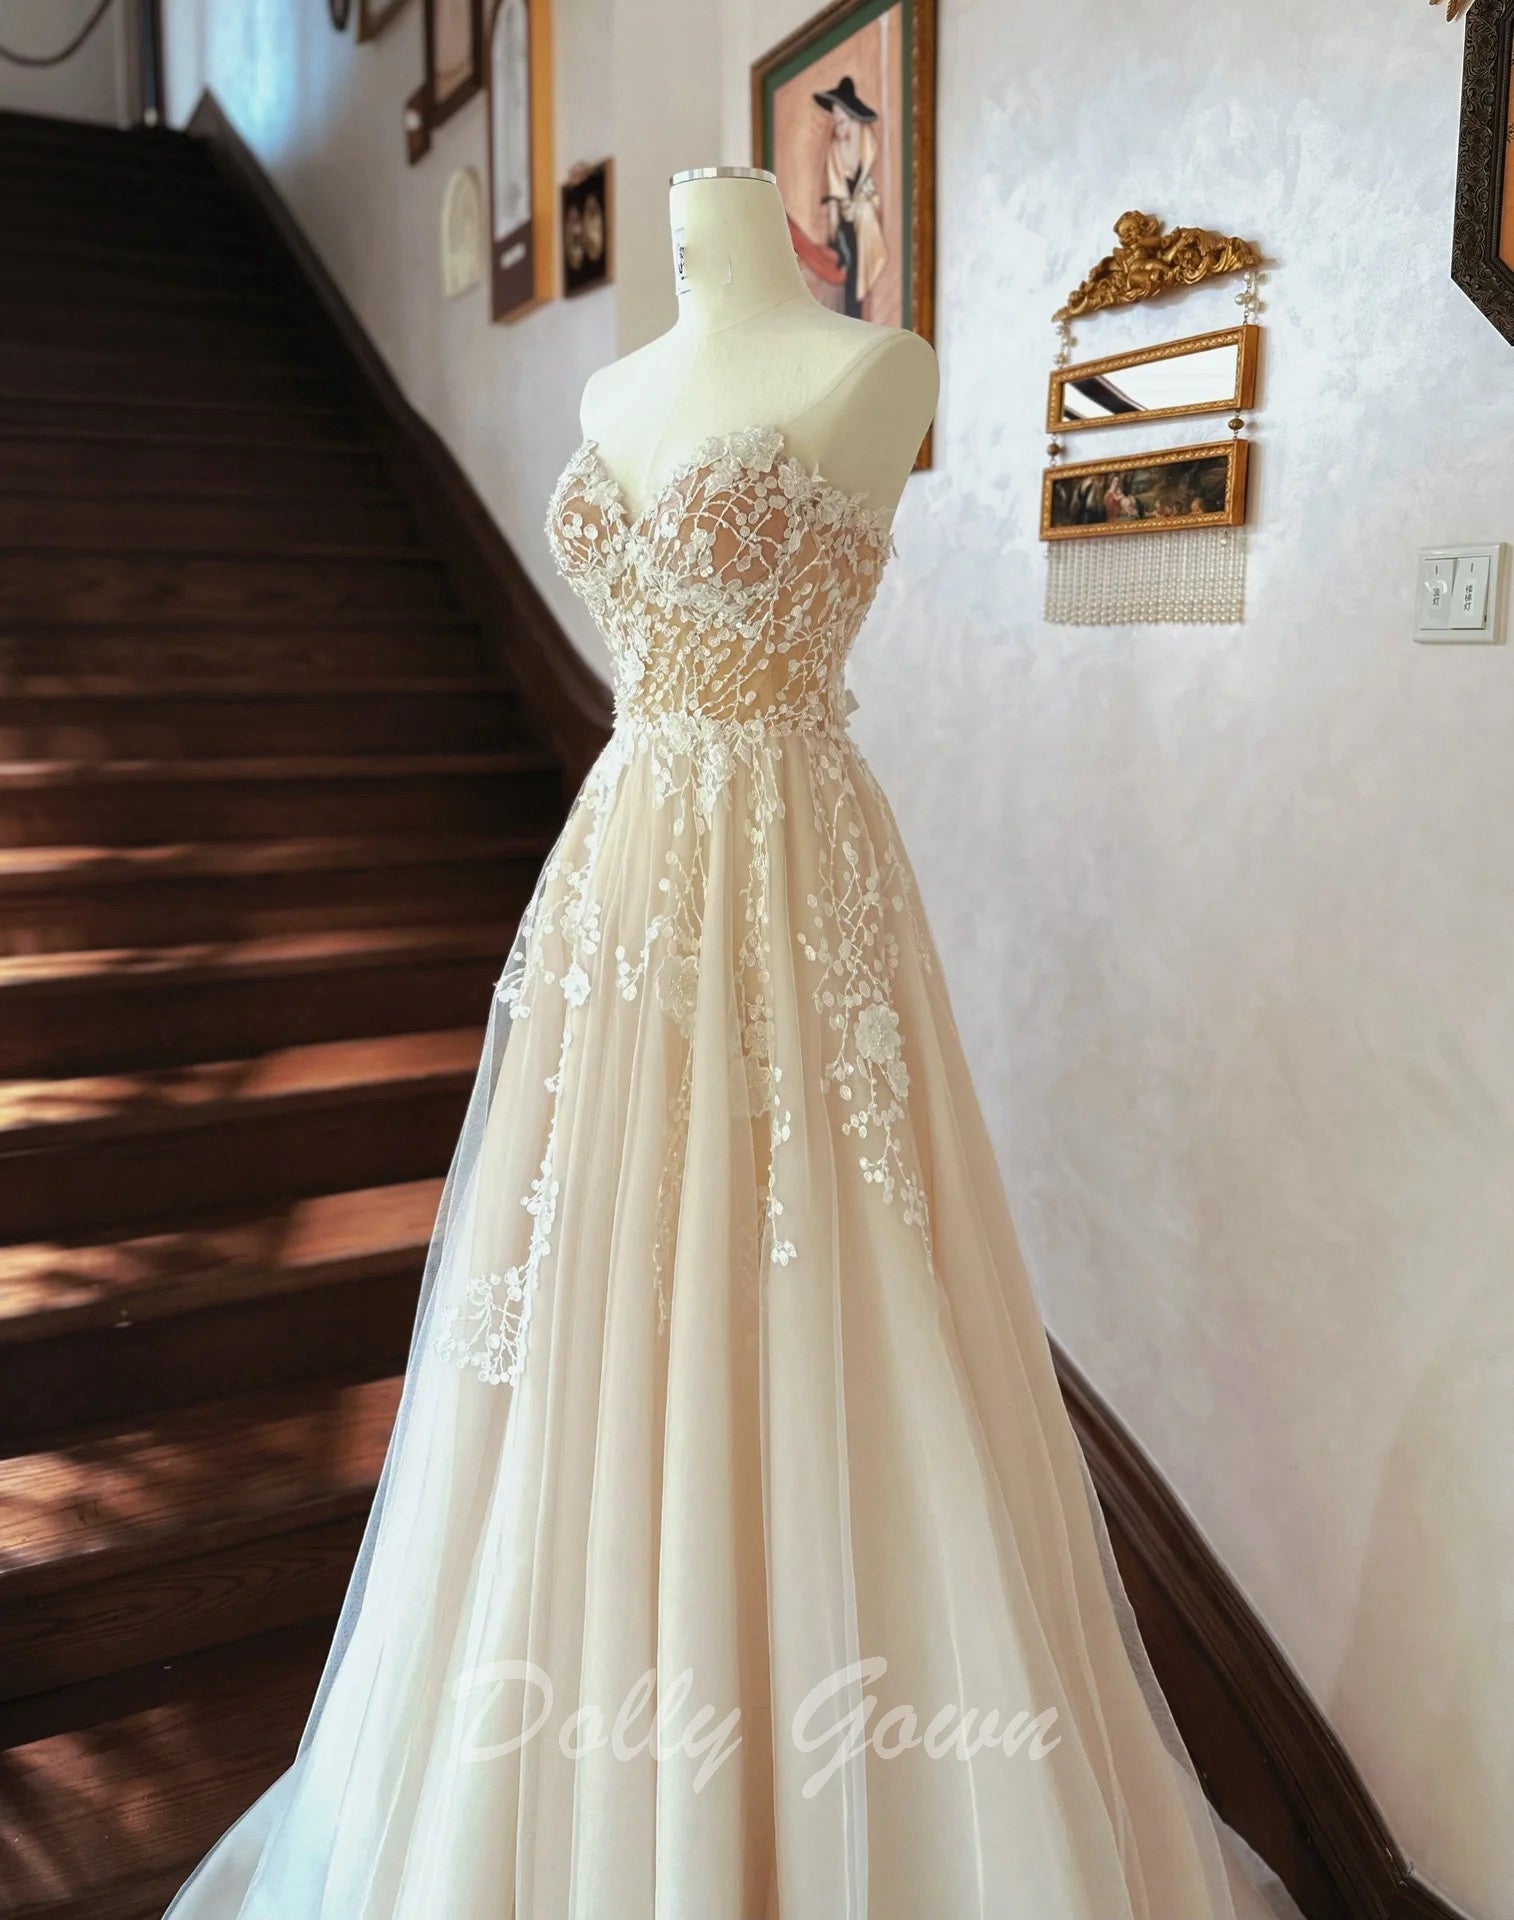 Sweet Floral Lace Strapless A-line Sheer Champagne Wedding Dress - DollyGown